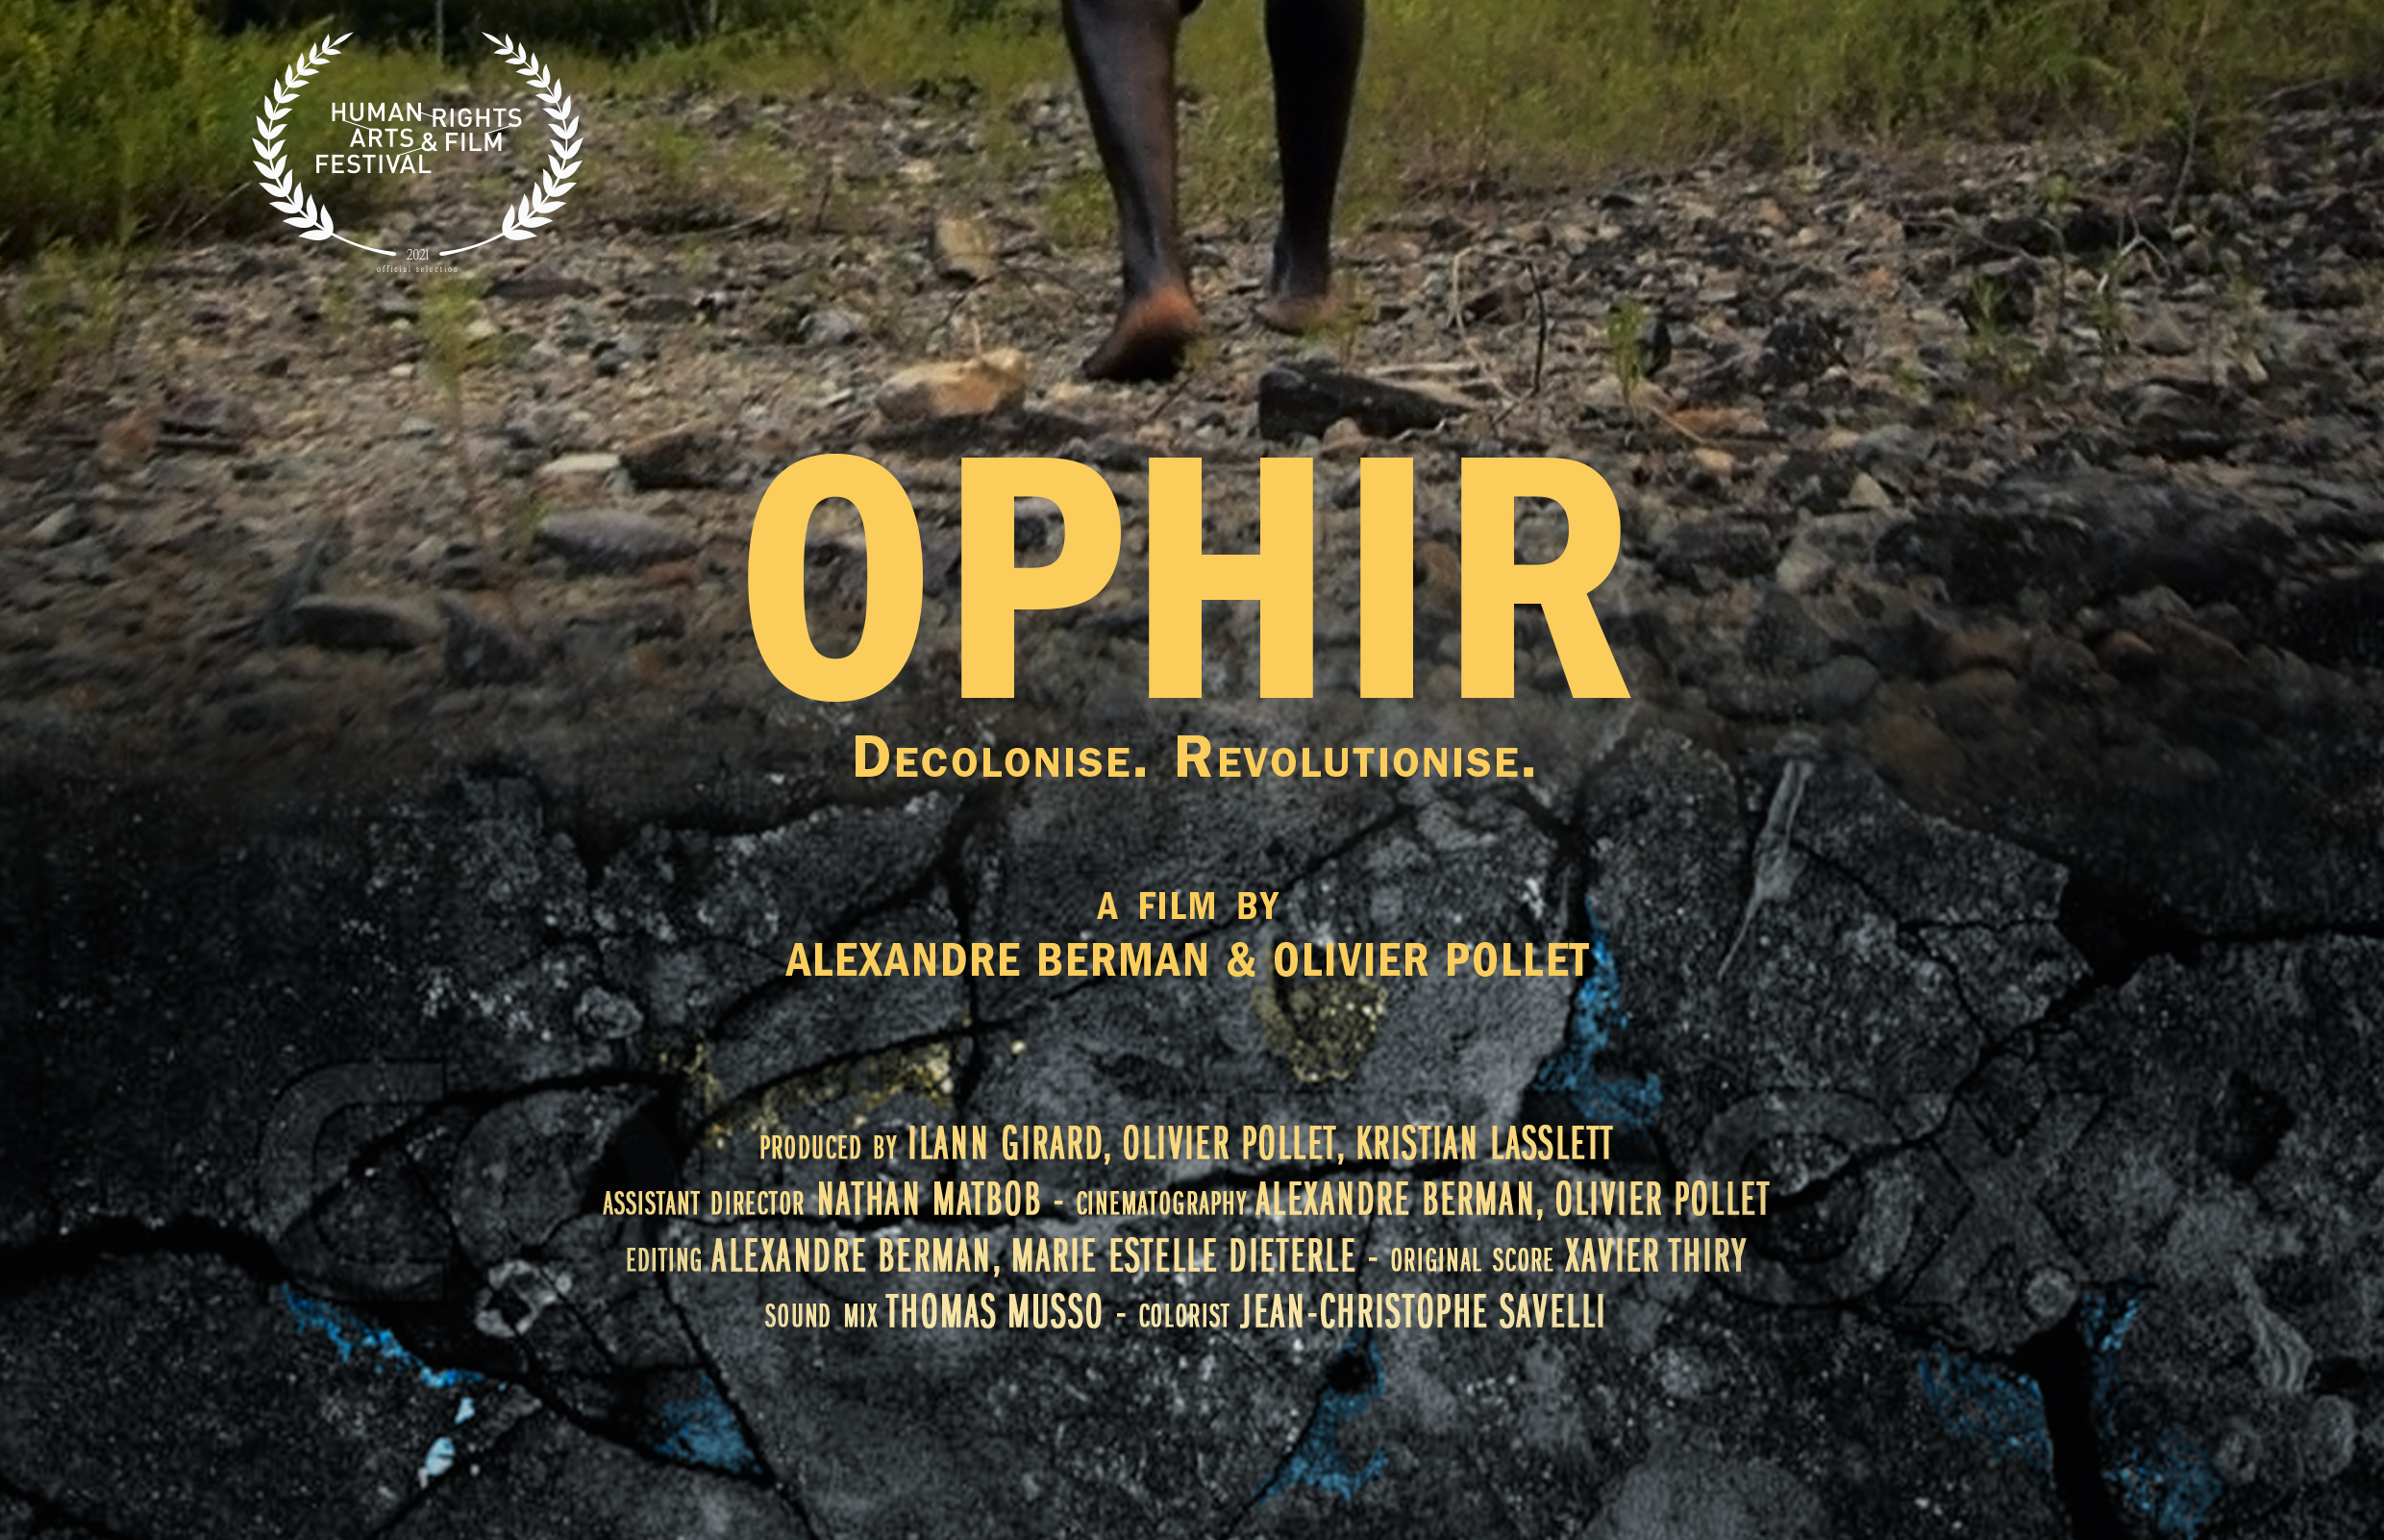 OPHIR: DECOLONISE, REVOLUTIONISE | FOLLOWED BY Q&A